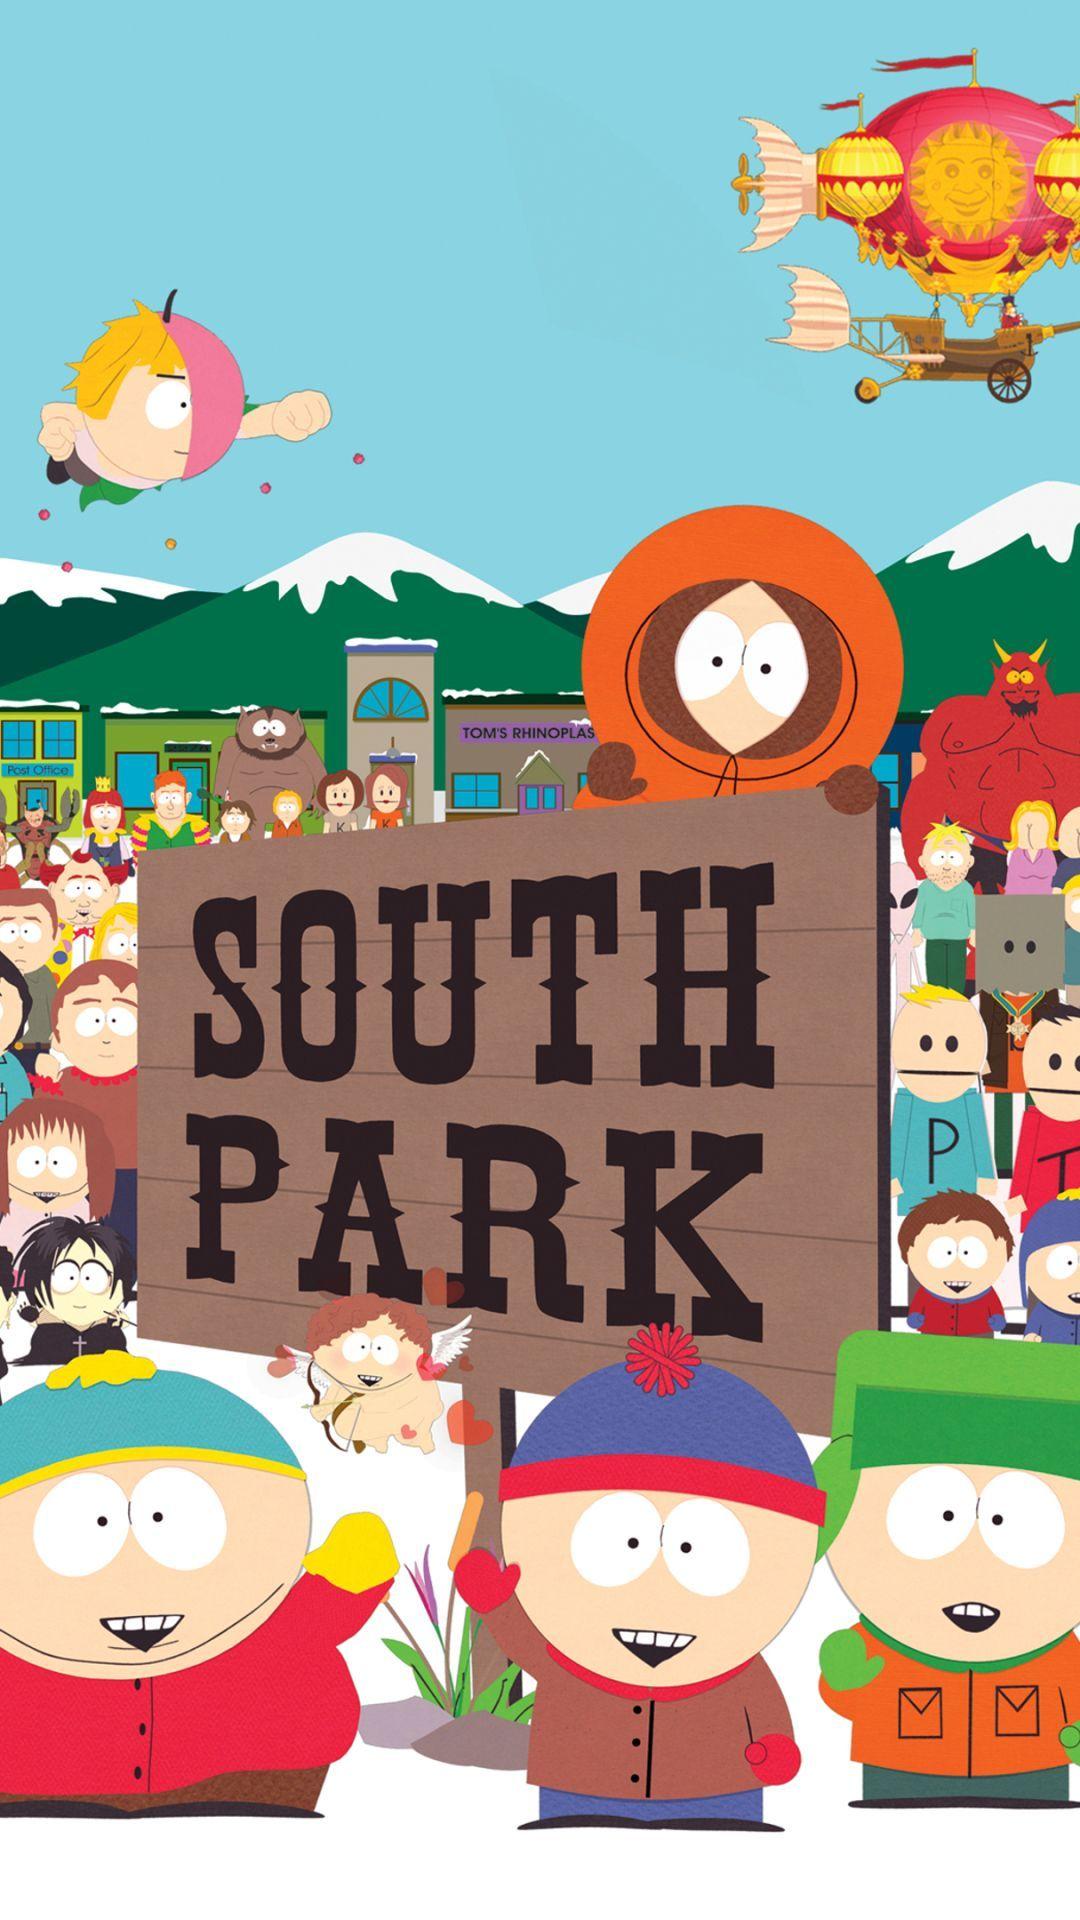 South Park Wallpapers - Bigbeamng Store